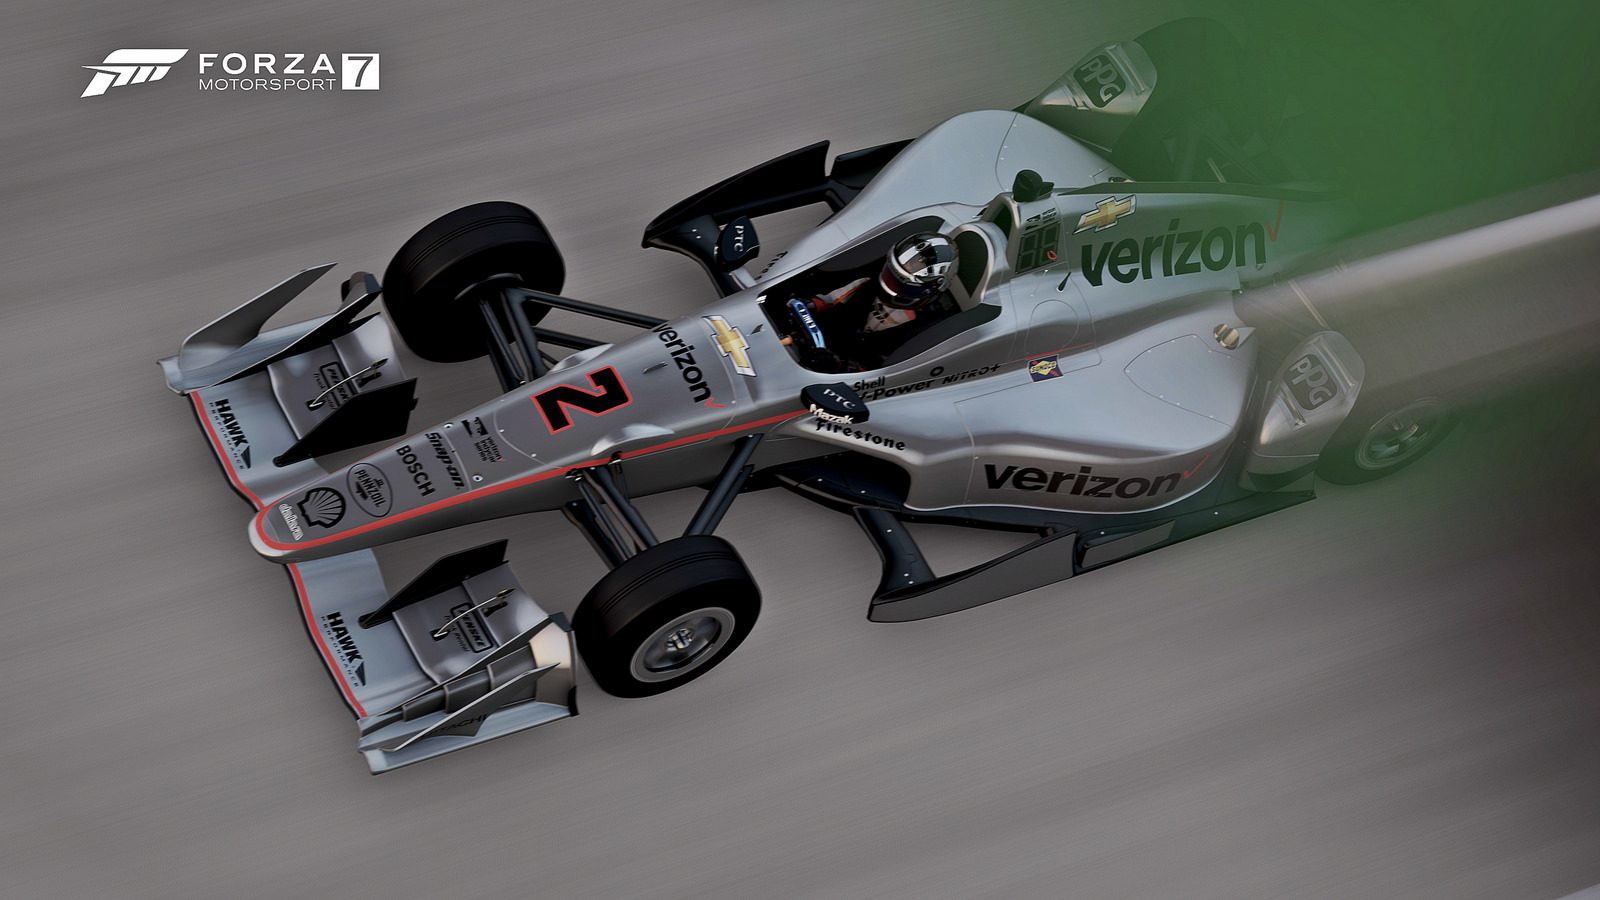 Get an in-depth look at 'Forza Motorsport 5,' featuring IZOD IndyCar Series  cars, today at 1 p.m. (ET)